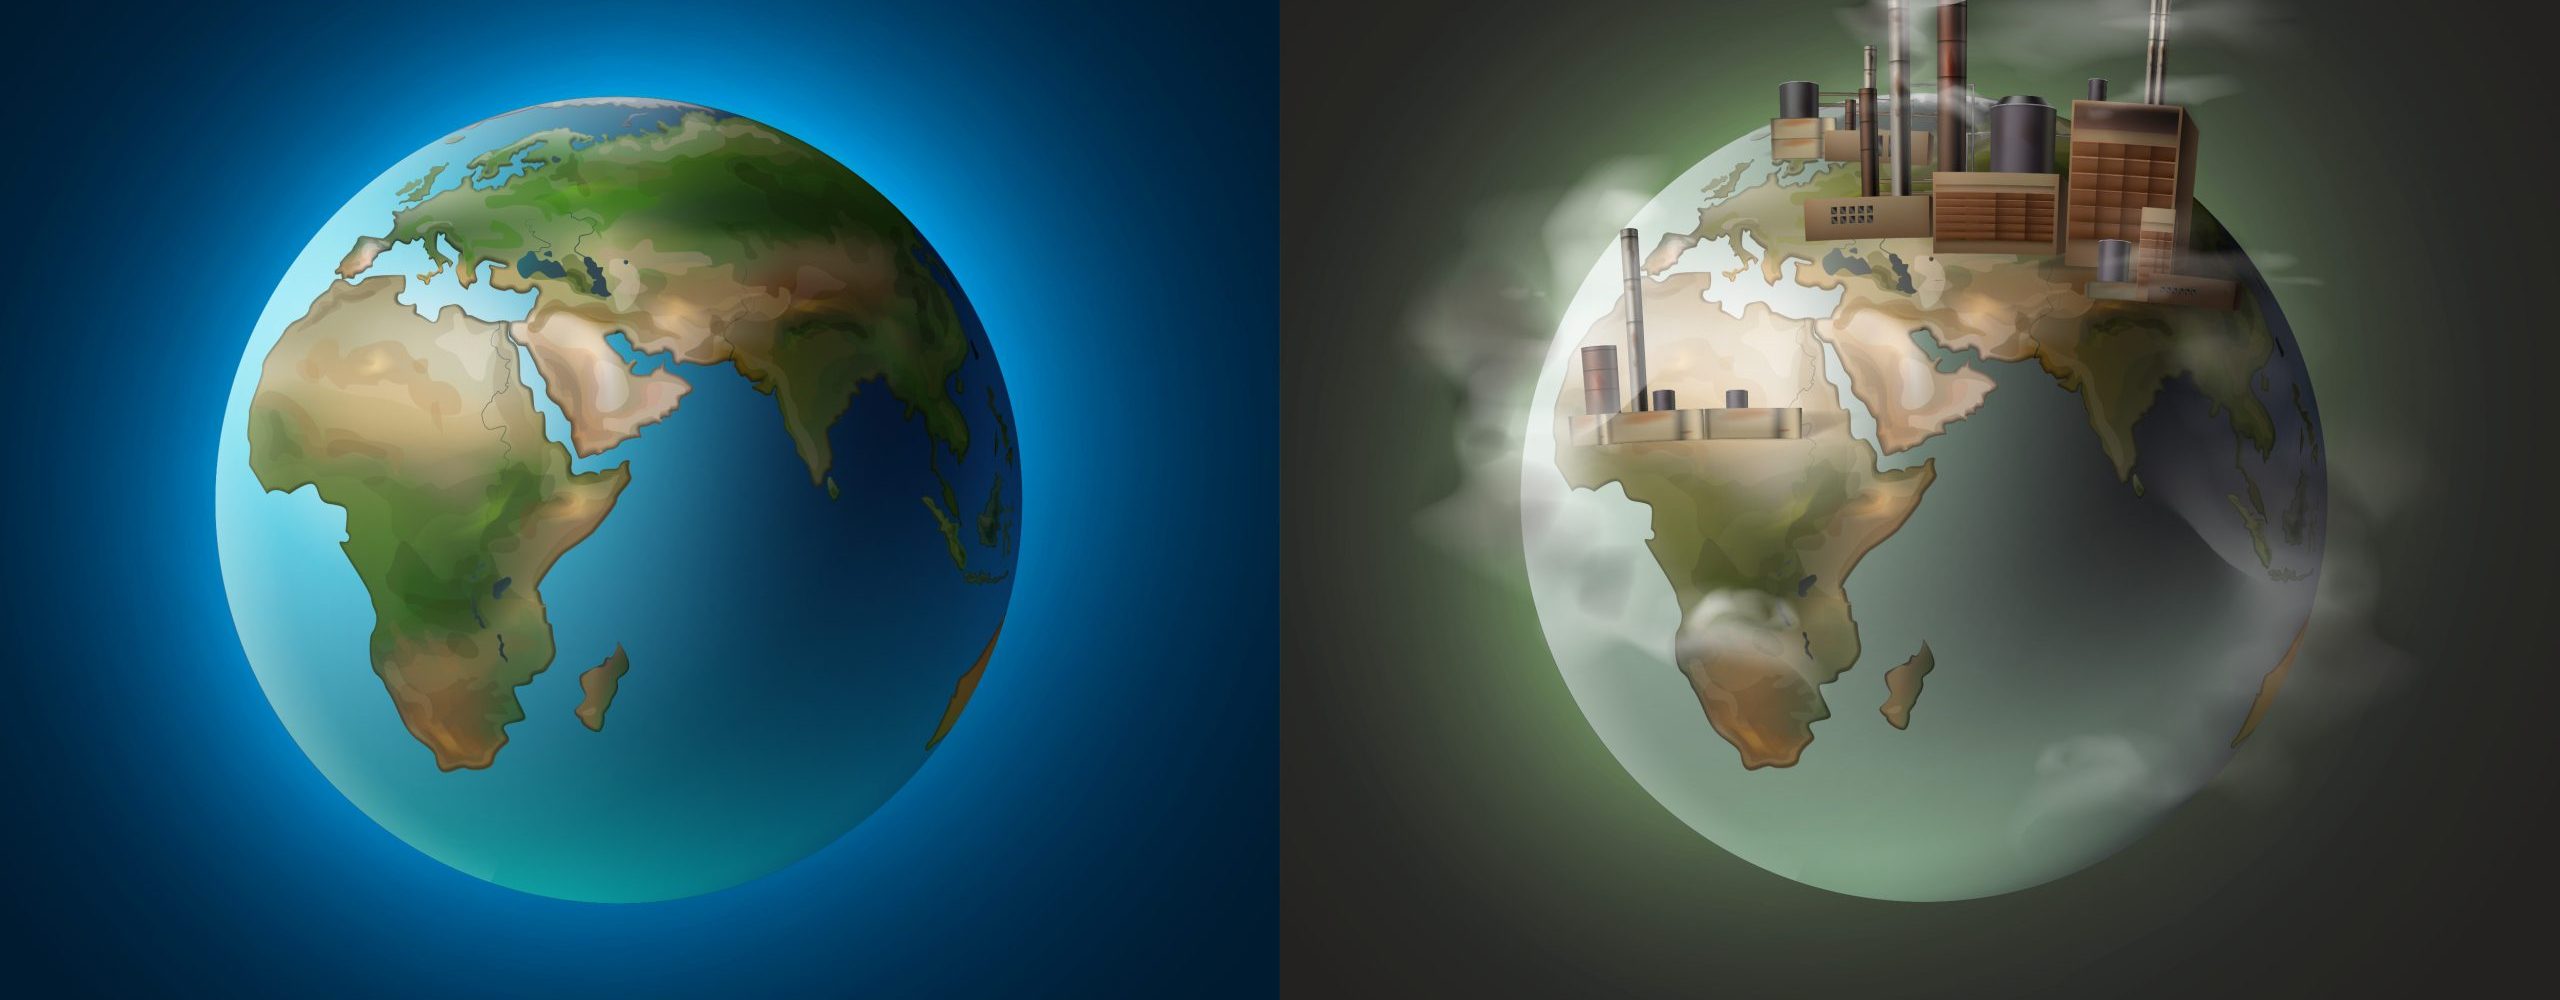 Vector illustration concept ecological clean planet against pollution environmental